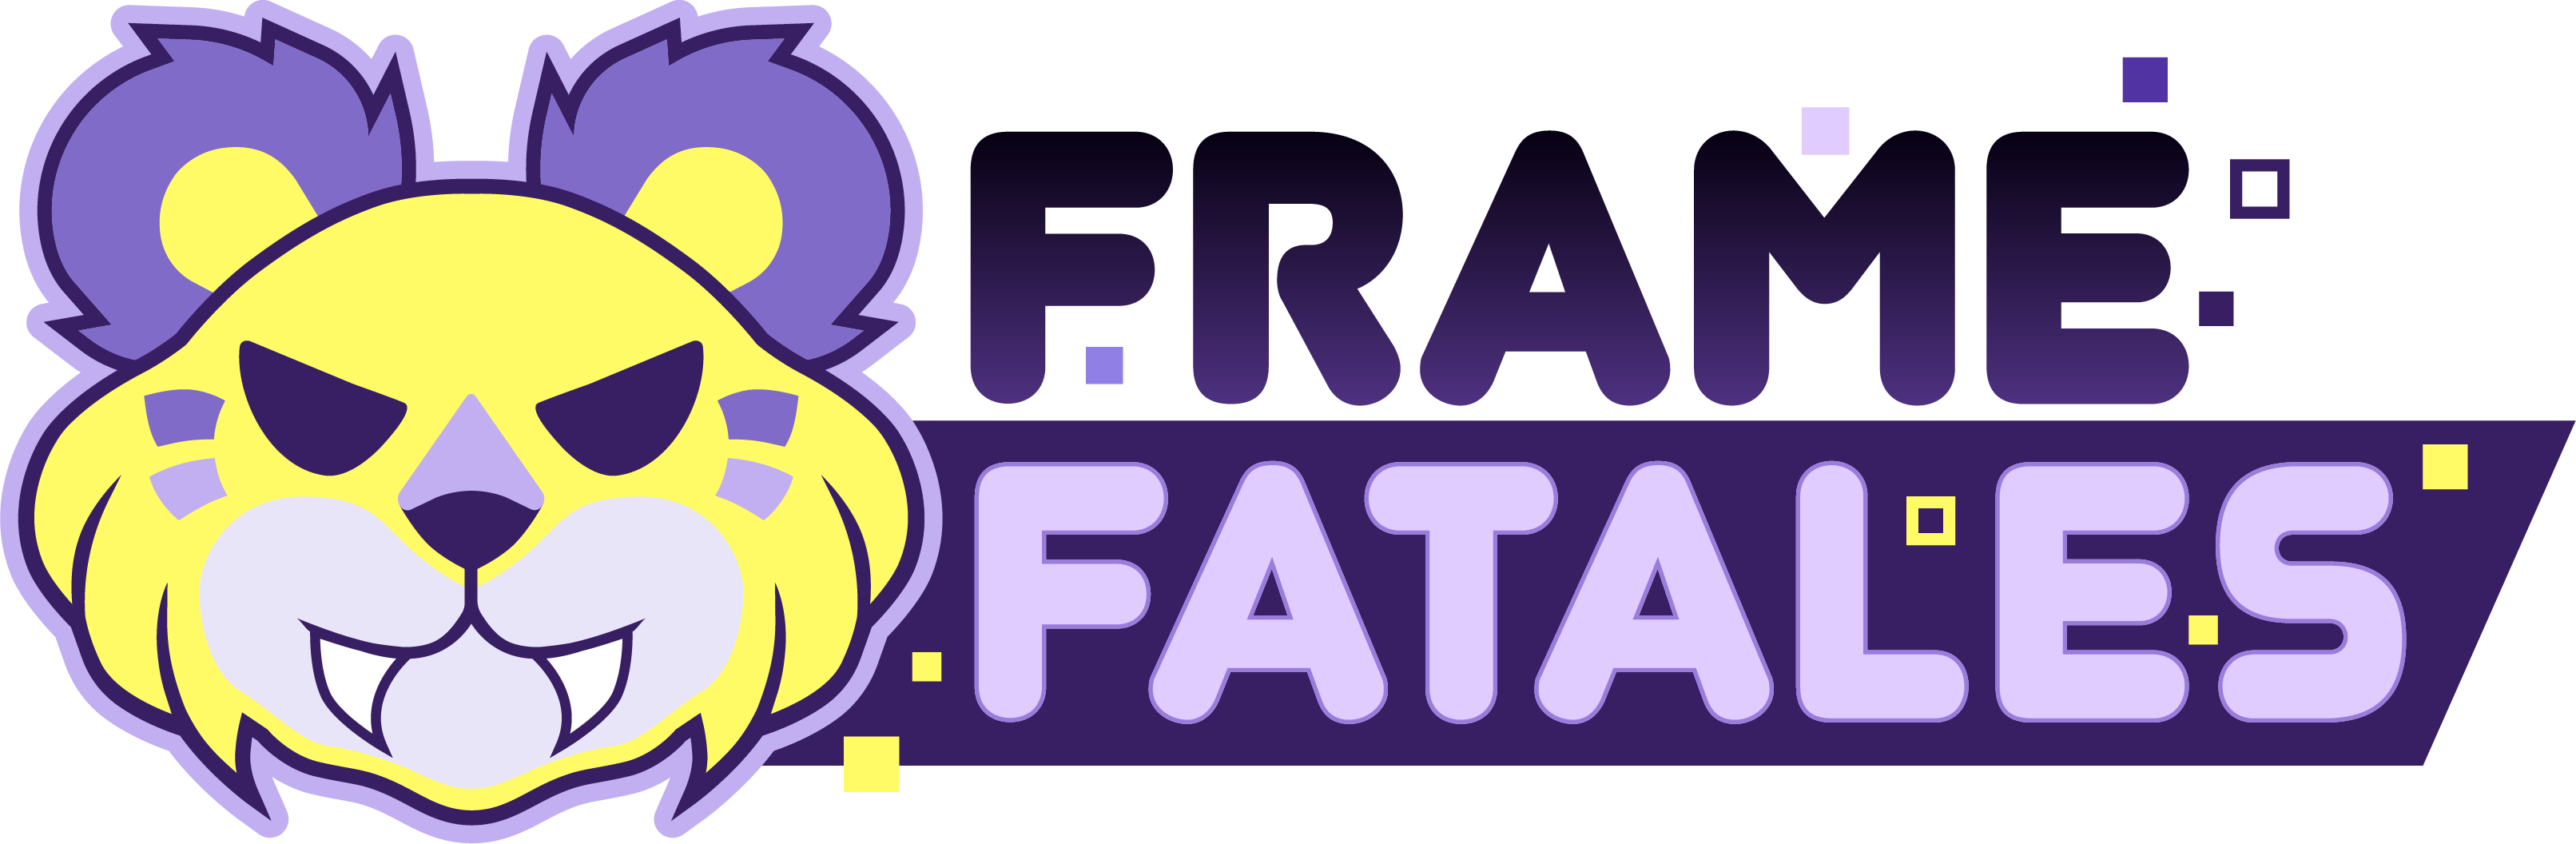 Frame Fatales video game charity logo